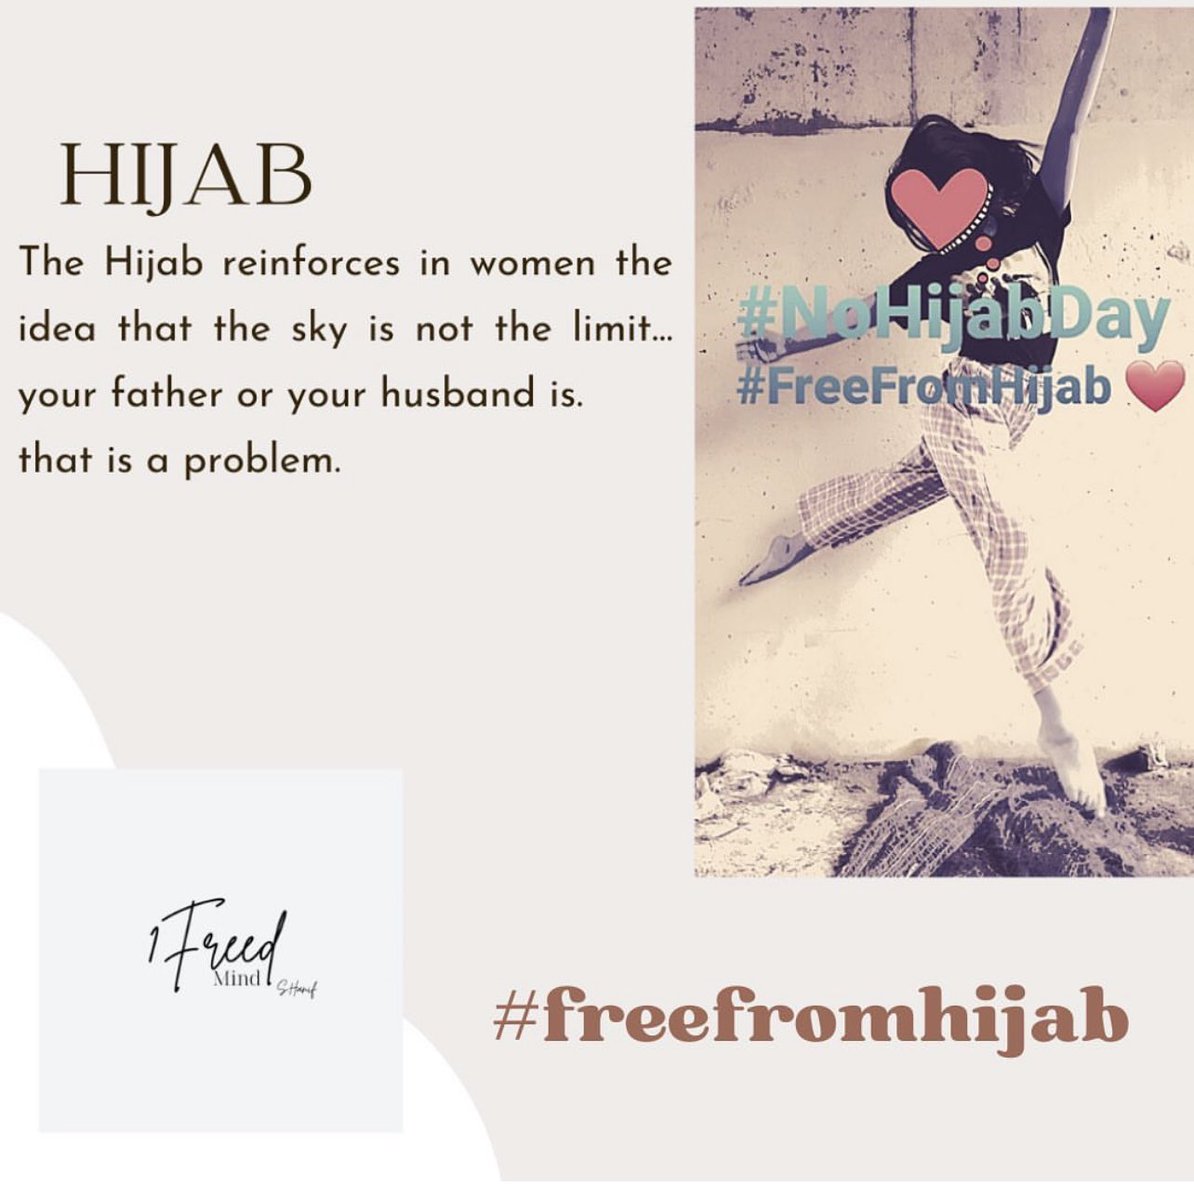 The Hijab is not just a cover over your head. It’s a symbolic upper limit determined by men, to your deemed potential and value as a woman. 
In order to rise above those limits, you have to break through that ceiling.
That’s why #NoHijabDay